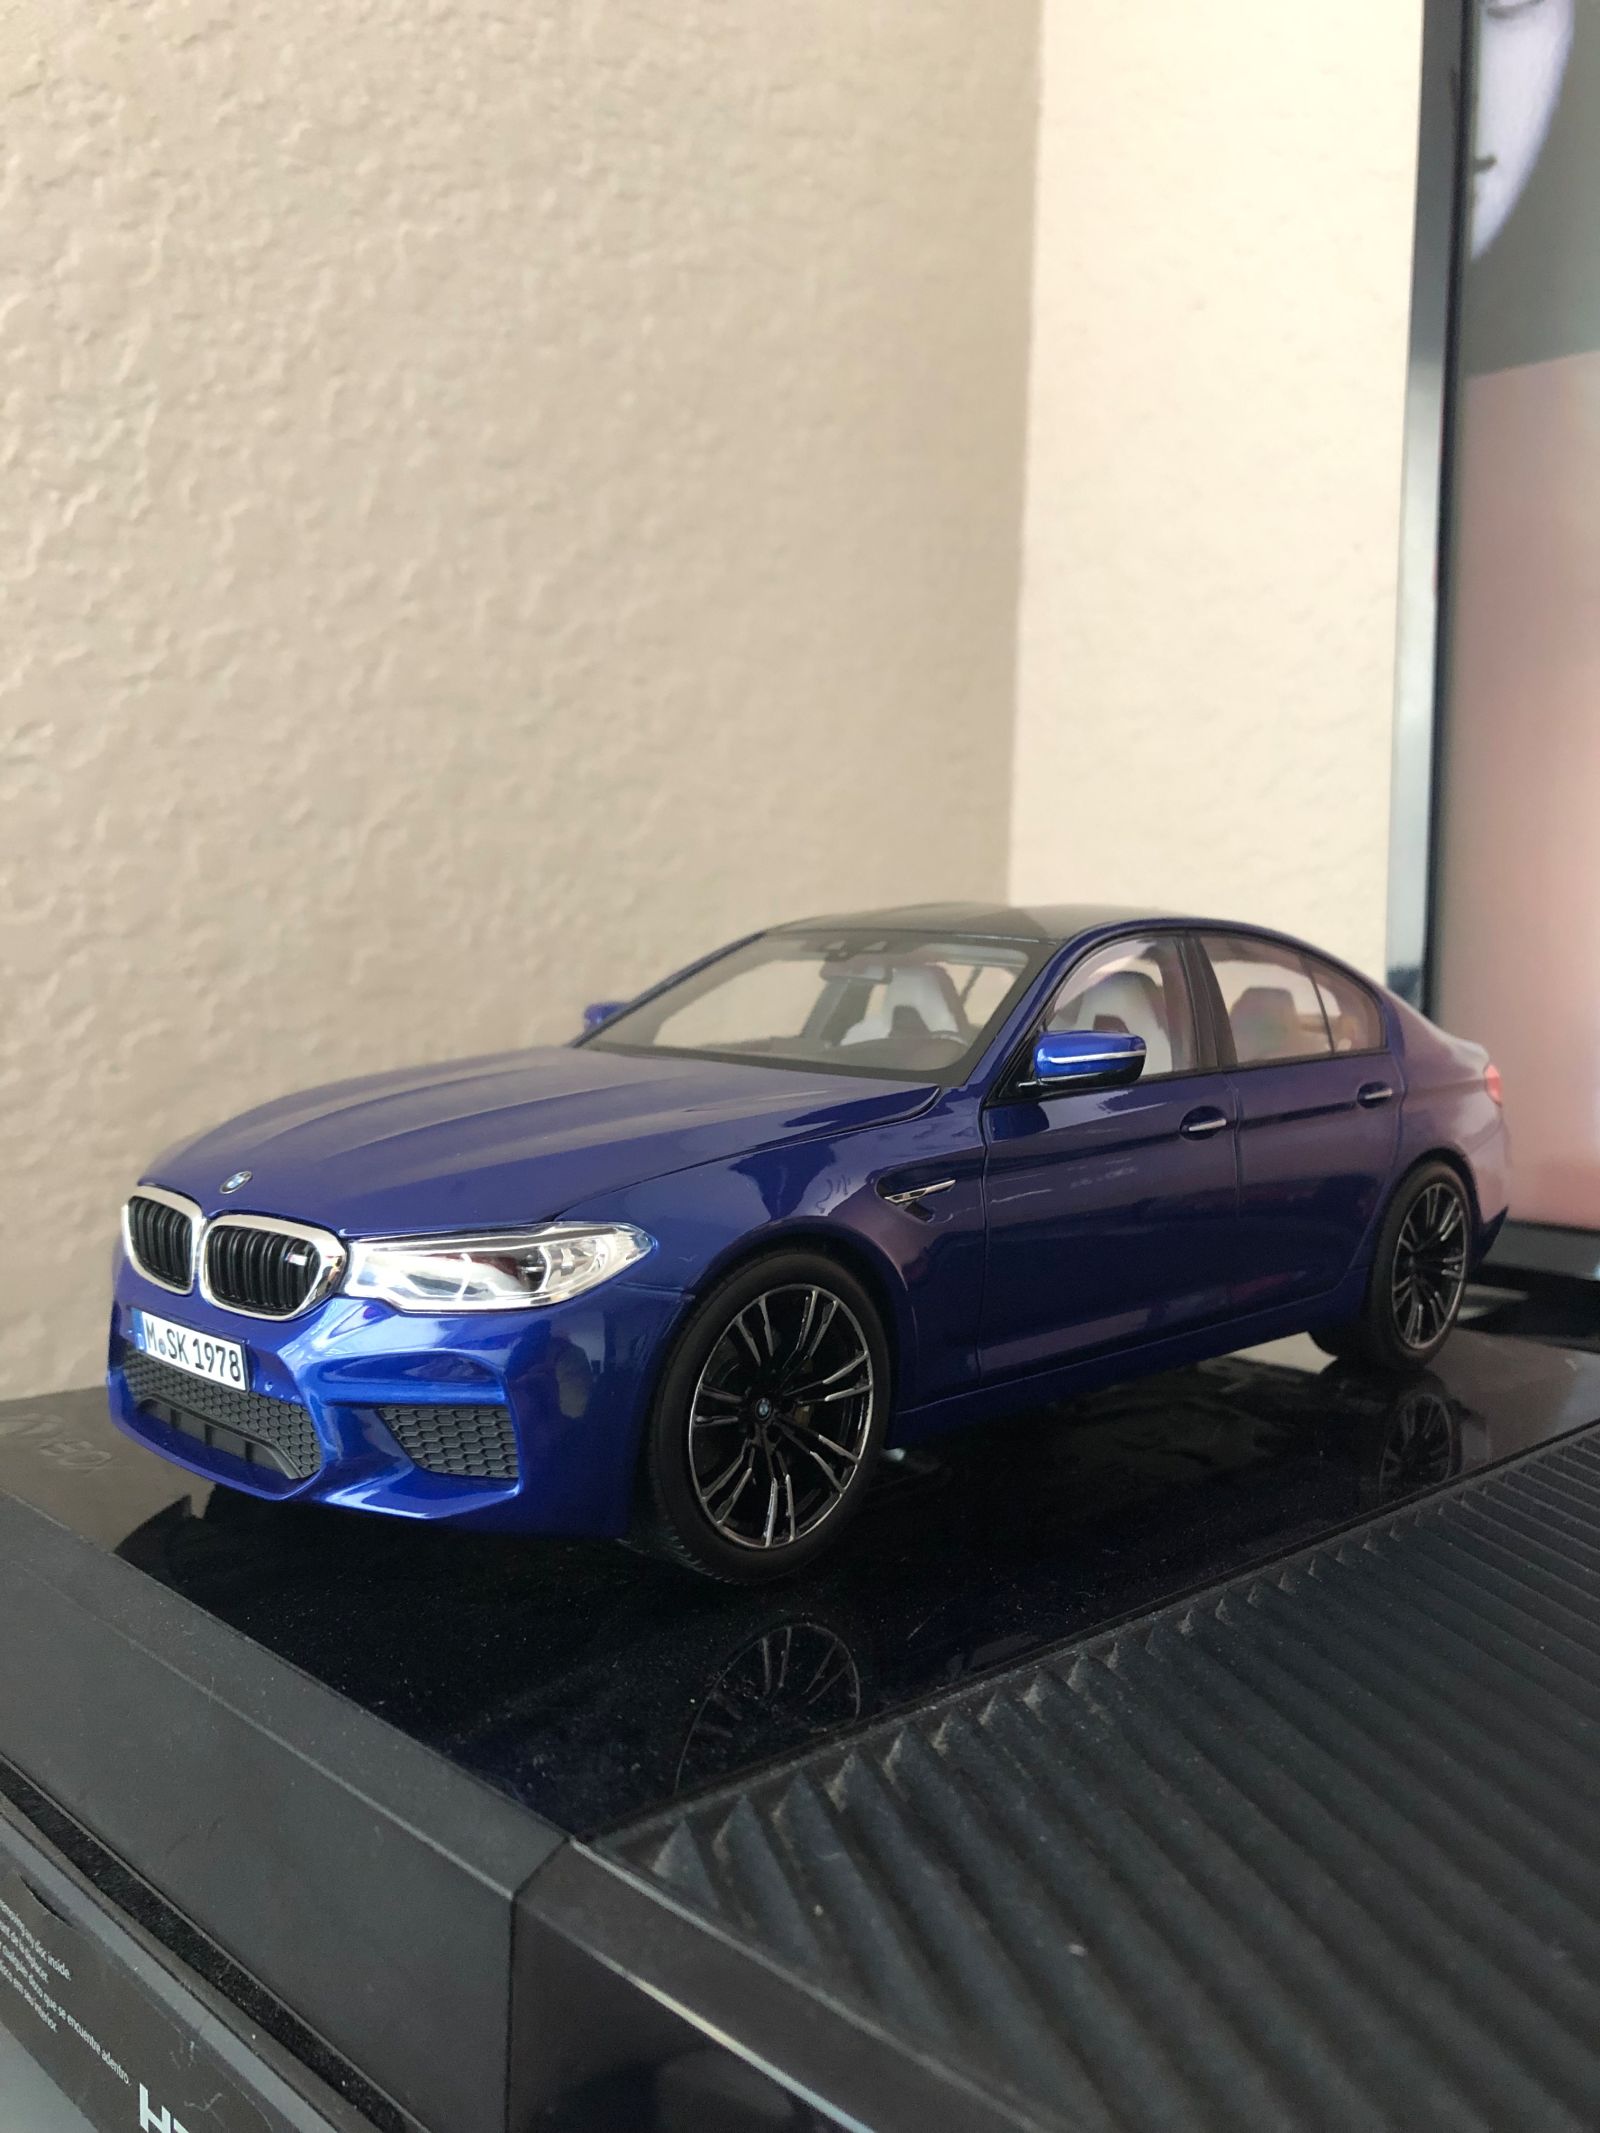 Illustration for article titled Meet my new 1/18 Norev 2018 BMW M5 (F90)